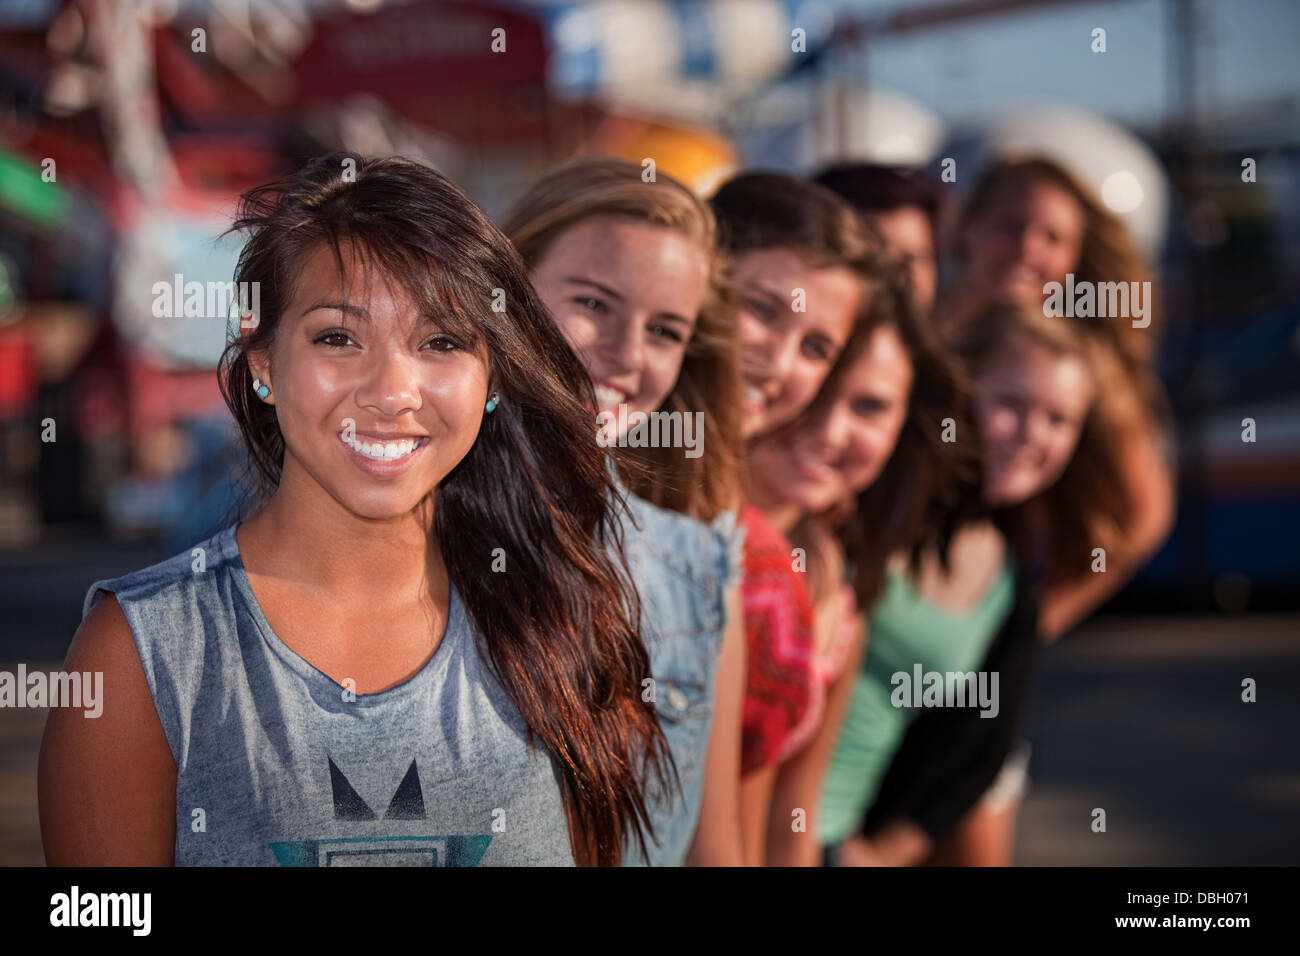 Row of Cute Girls at Theme Park Stock Photo